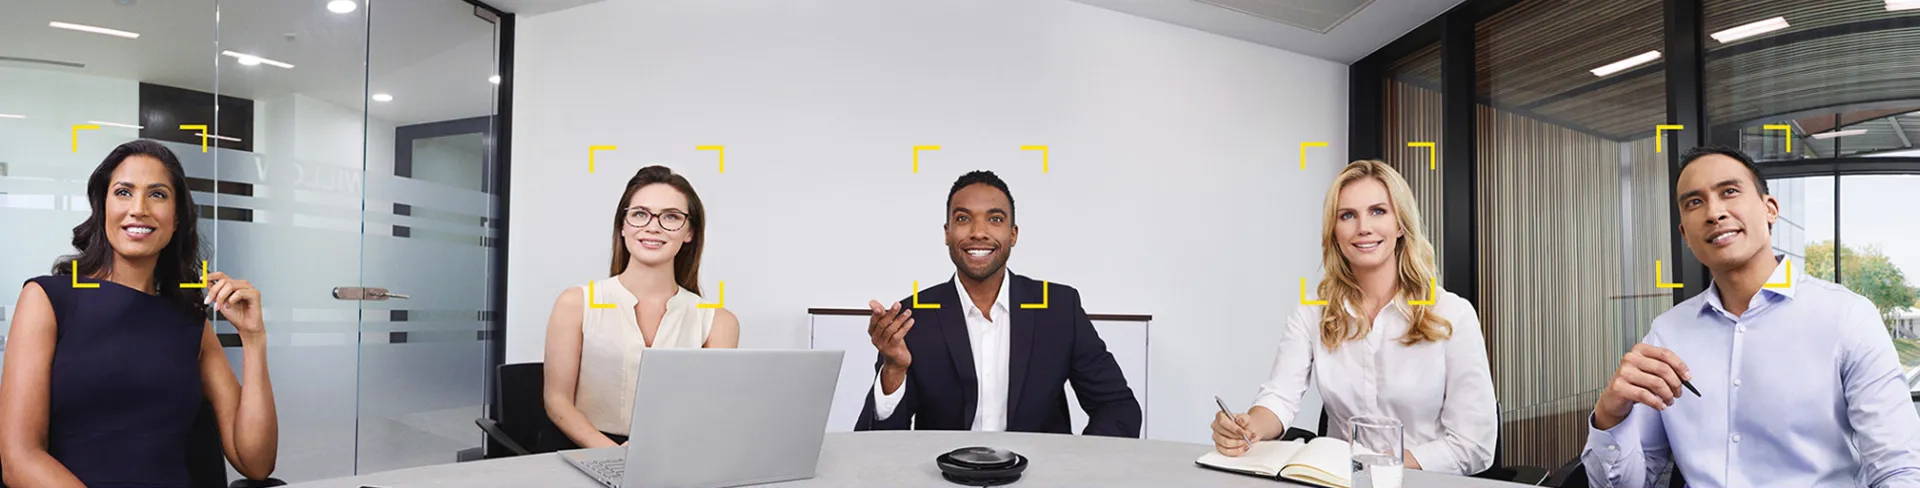 Jabra for audio and video conferencing solutions